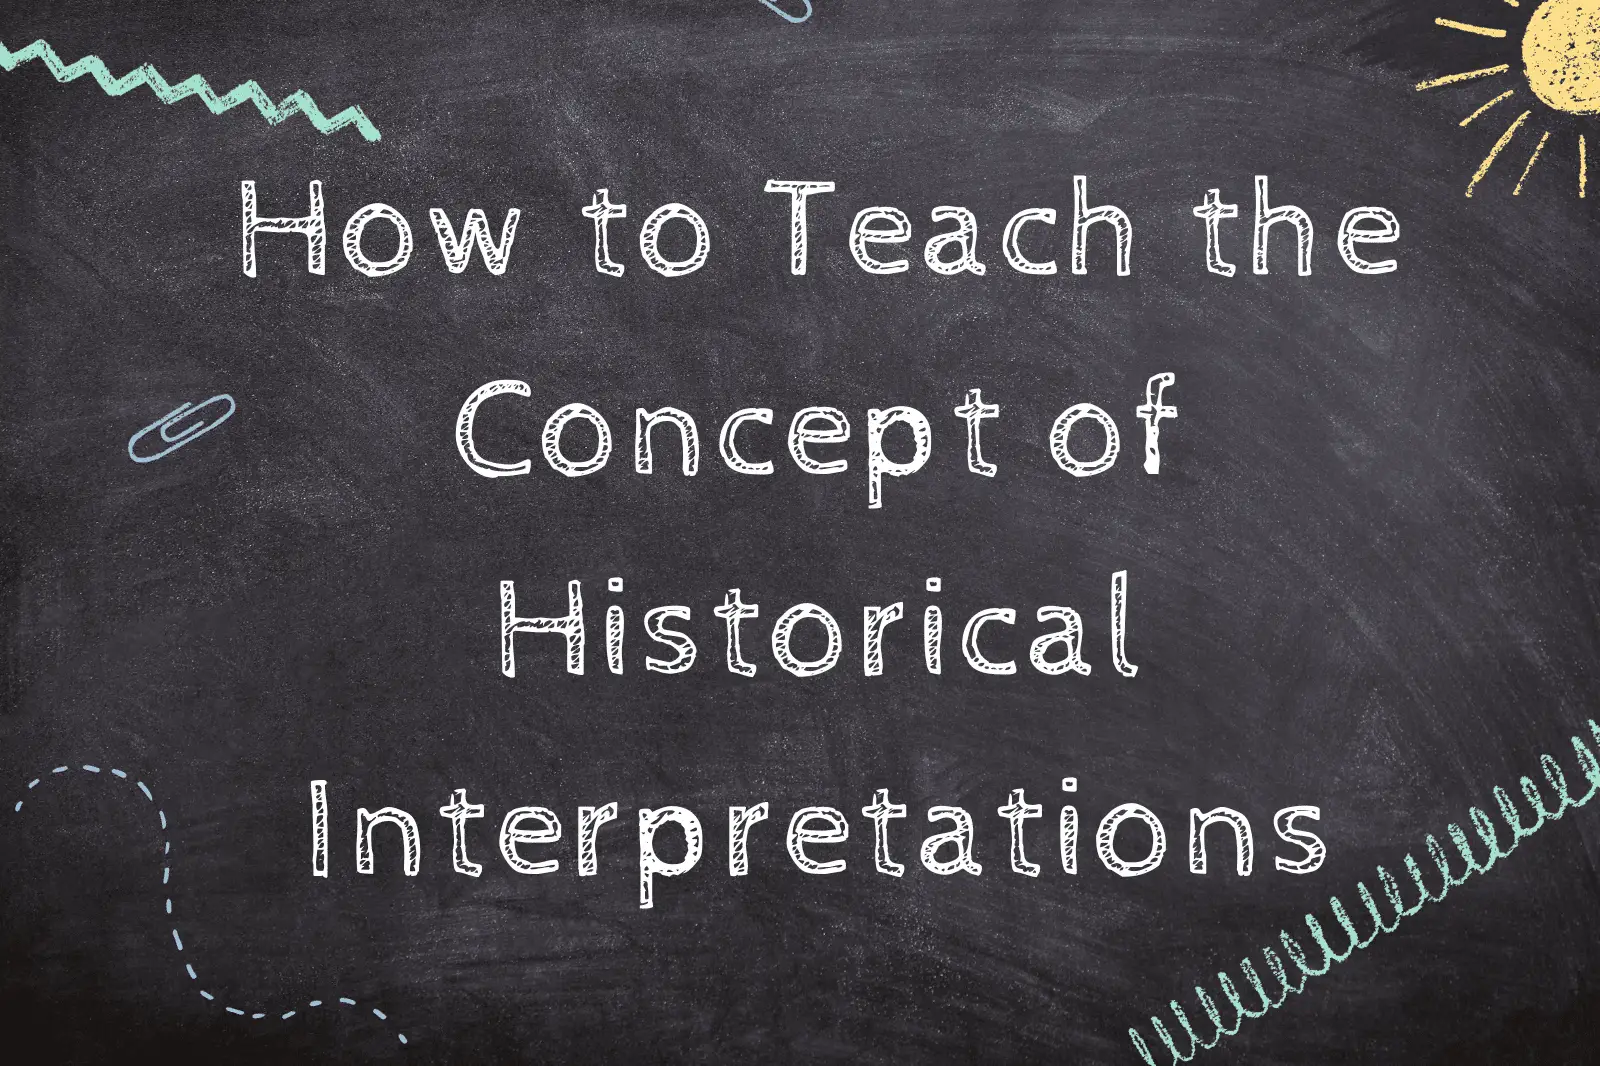 How to Teach the Concept of Historical Interpretations